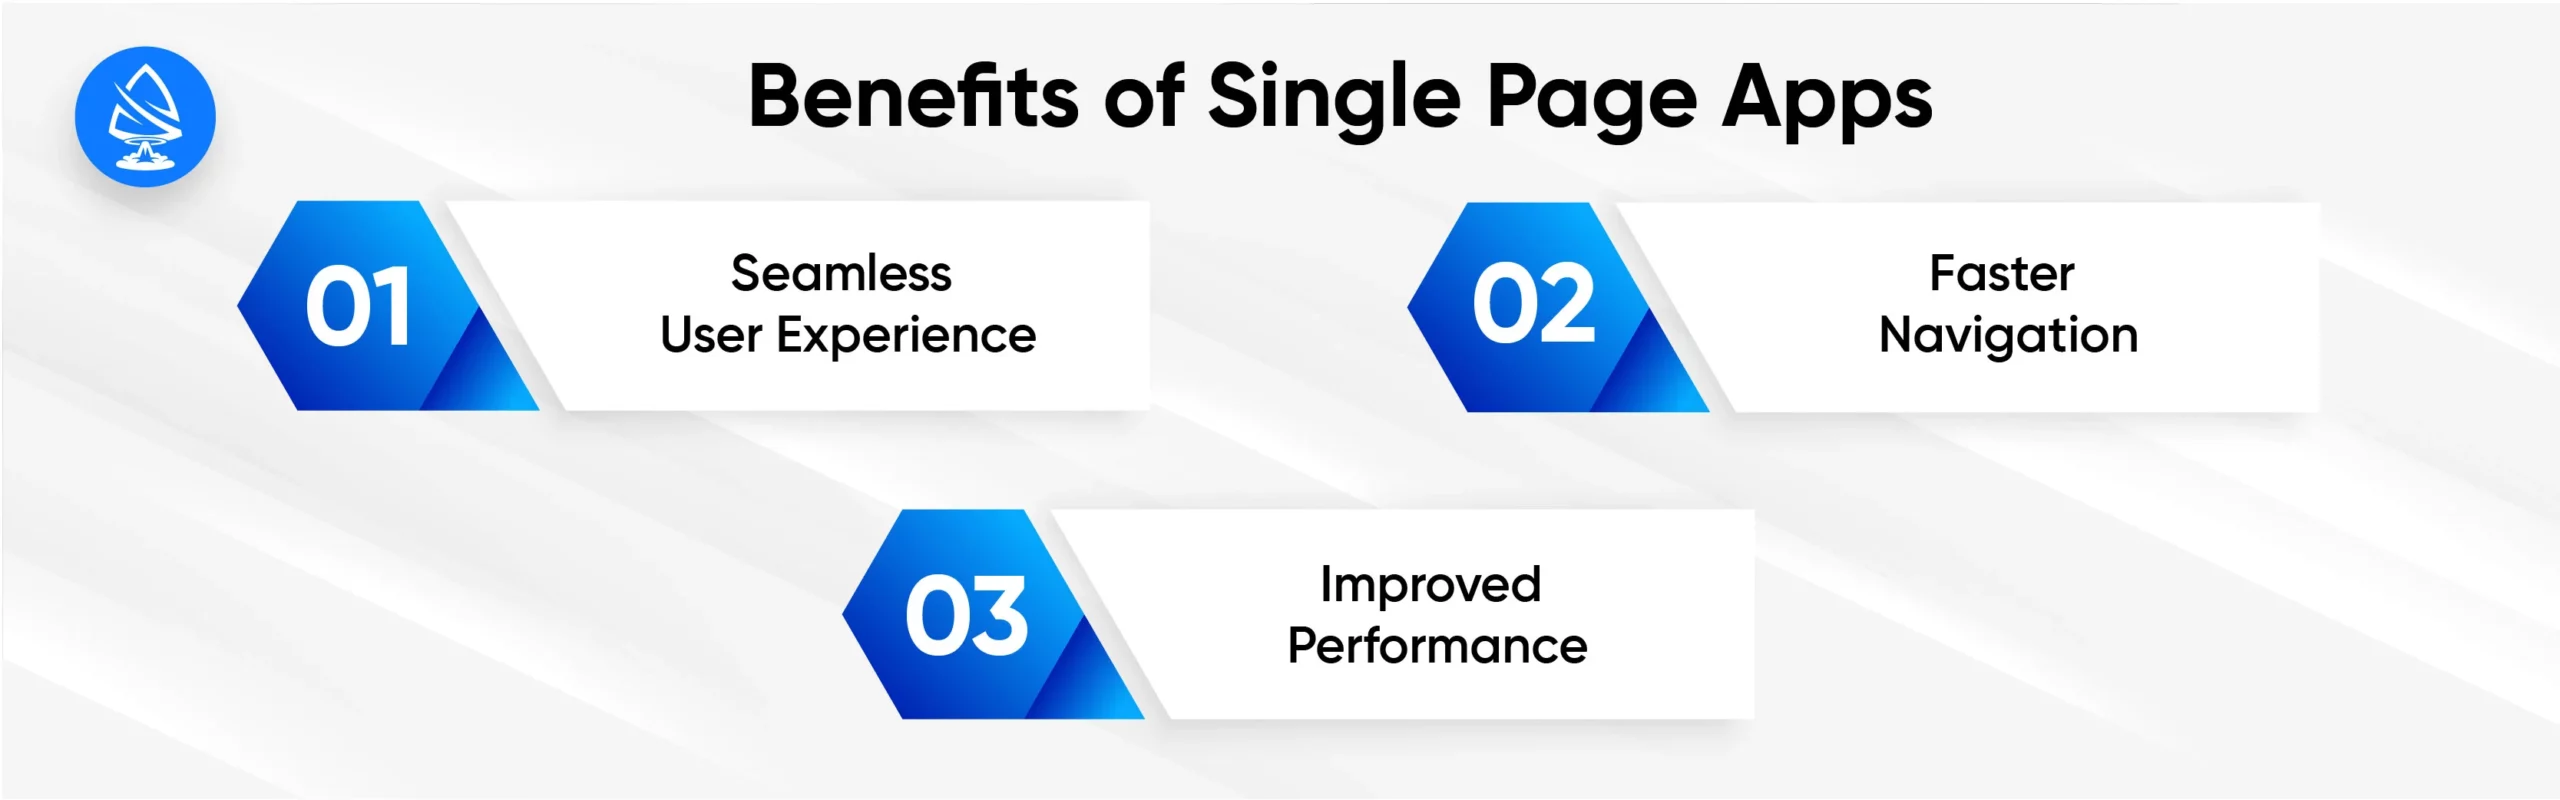 Benefits of Single Page Apps